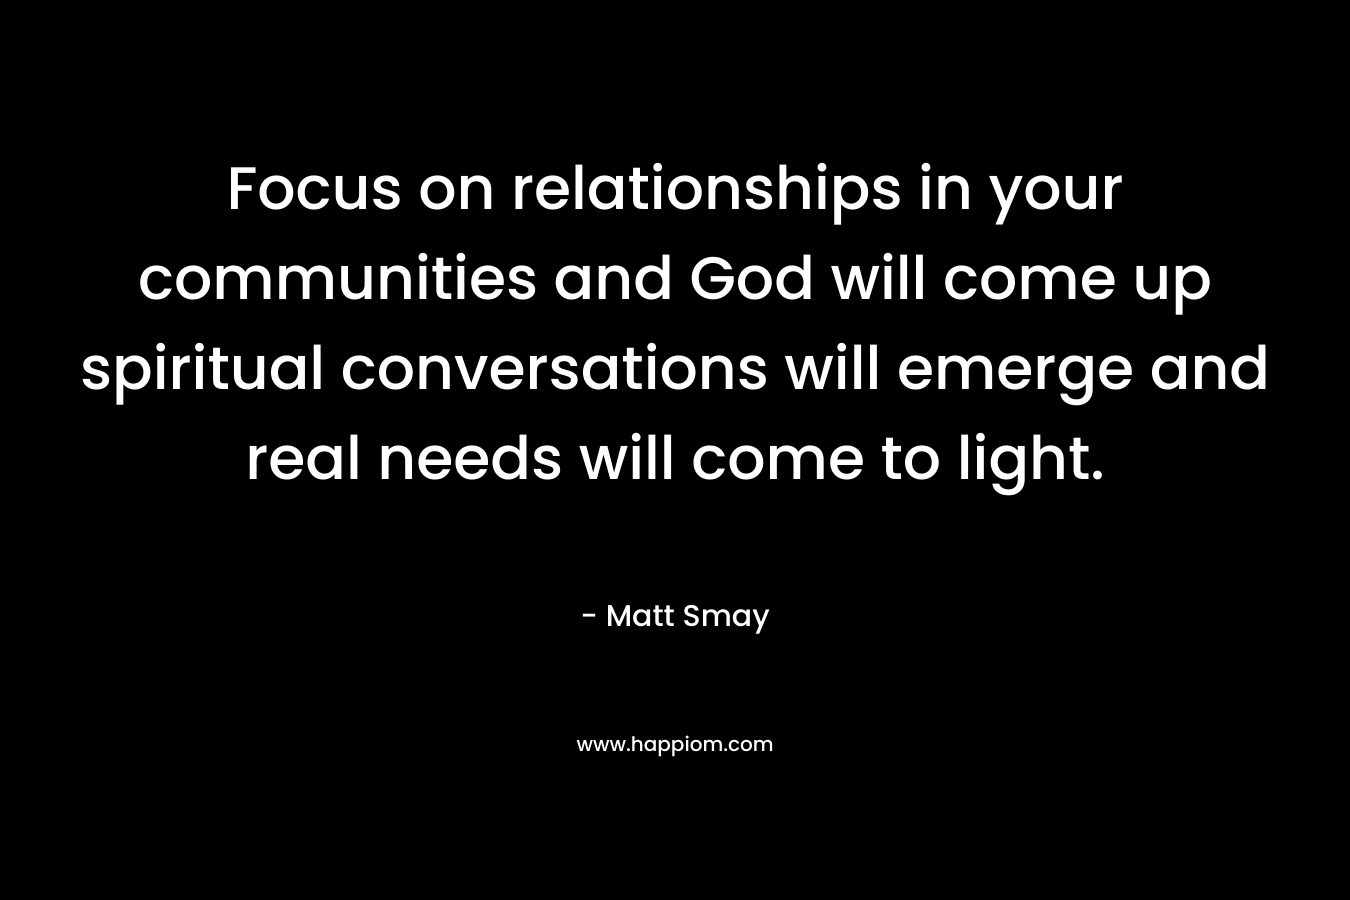 Focus on relationships in your communities and God will come up spiritual conversations will emerge and real needs will come to light. – Matt Smay